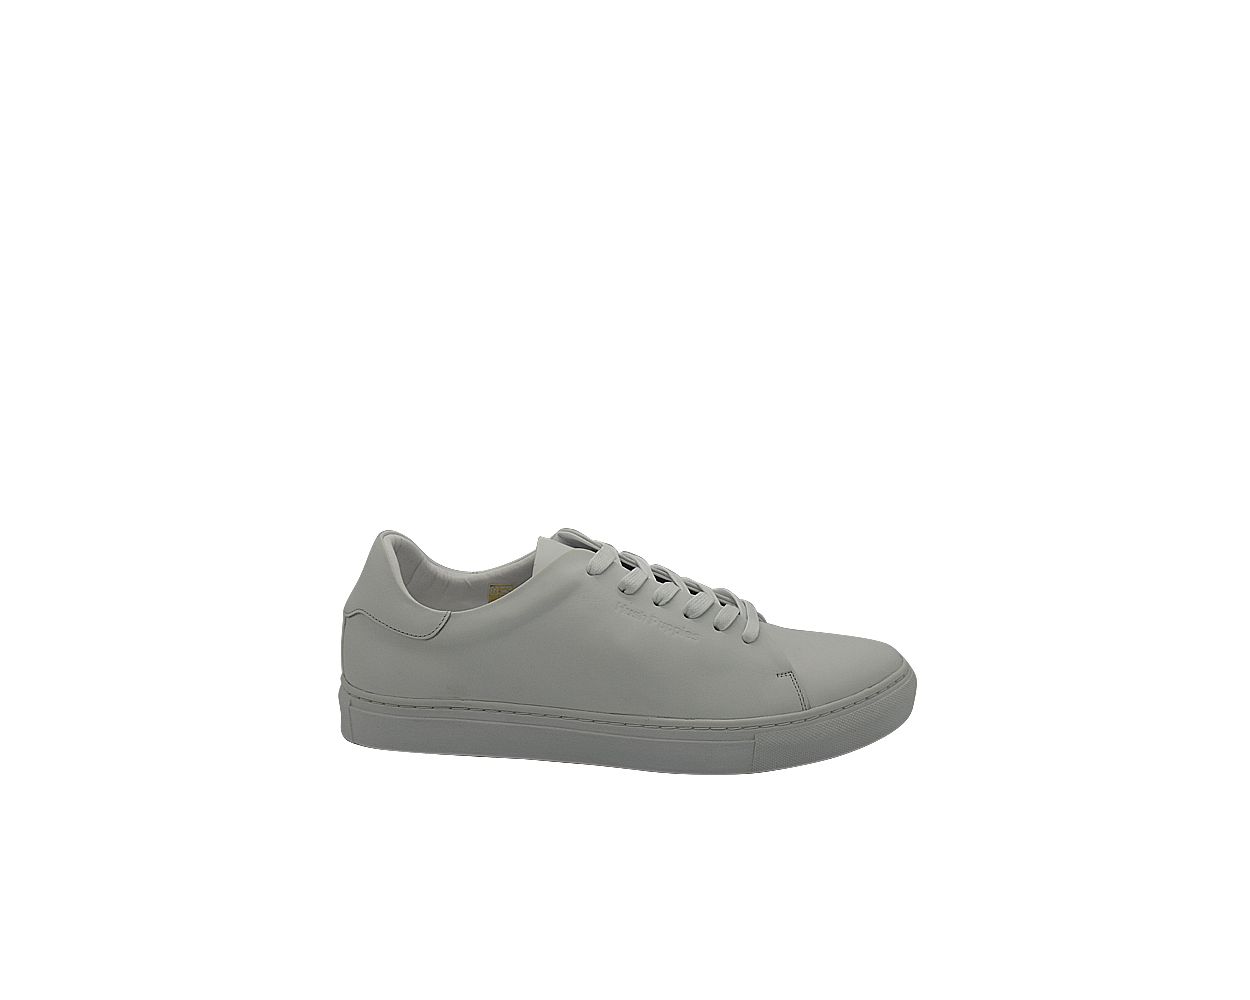 Hush Puppies Kenneth Sneaker In White